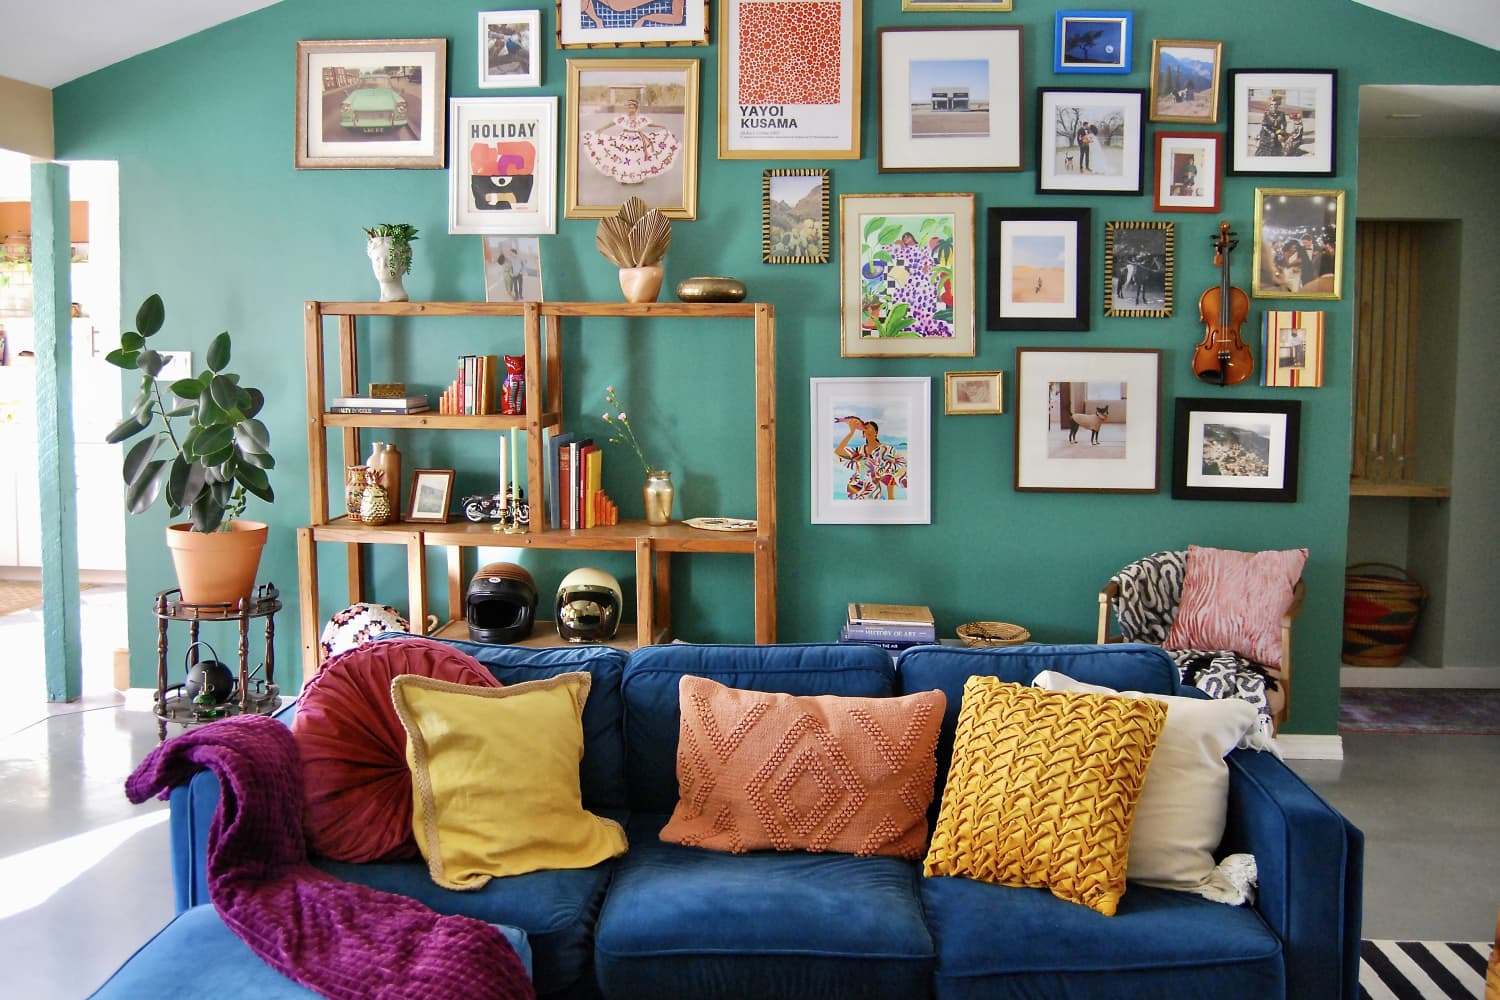 I Tried This Ingenious $6 Art Hack, and It Transformed My Gallery Wall